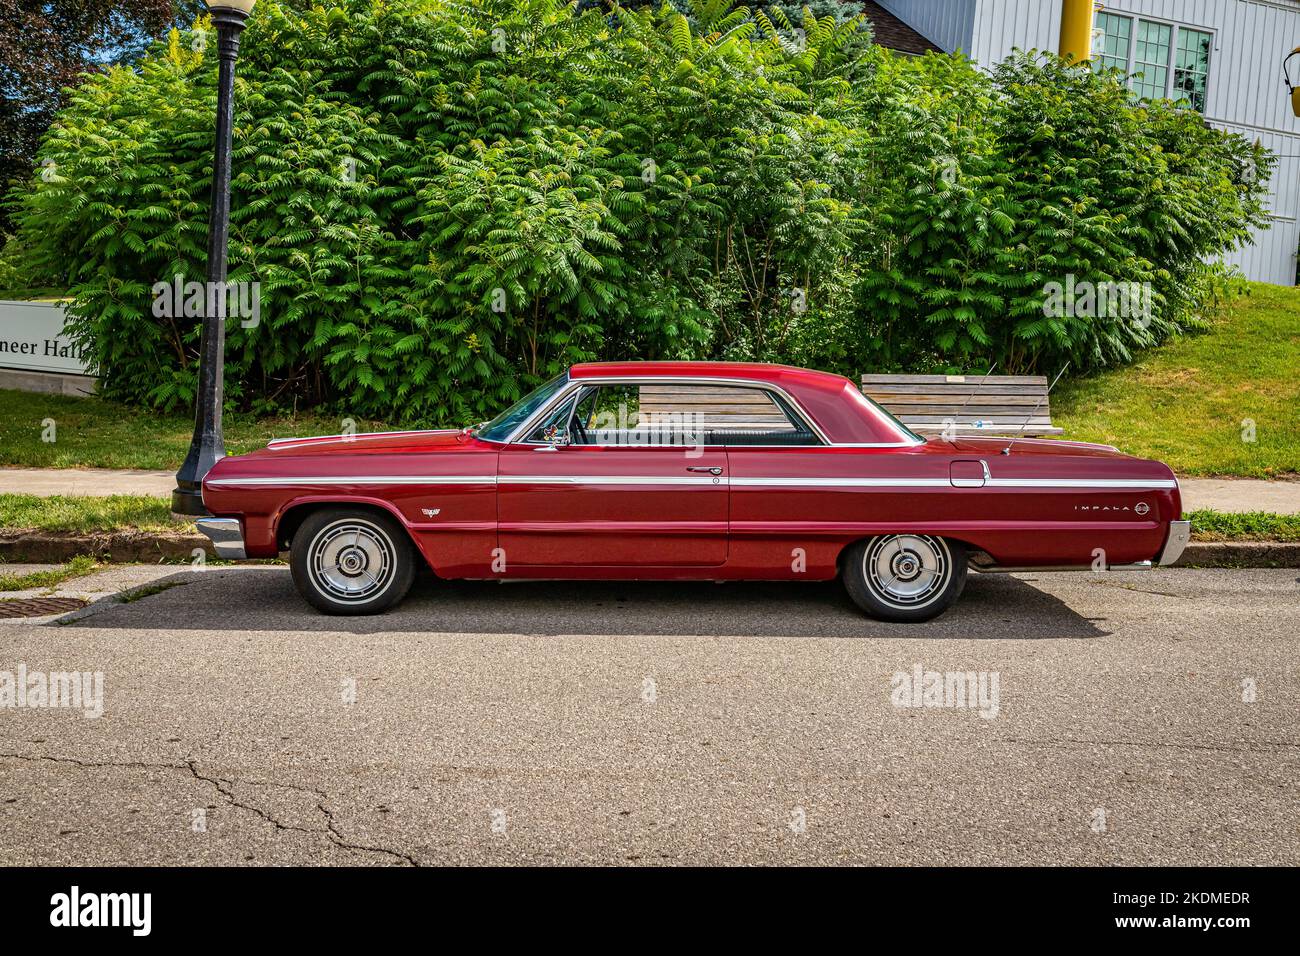 Des Moines, IA - July 02, 2022: High perspective side view of a 1964 Chevrolet Impala SS Hardtop Coupe at a local car show. Stock Photo